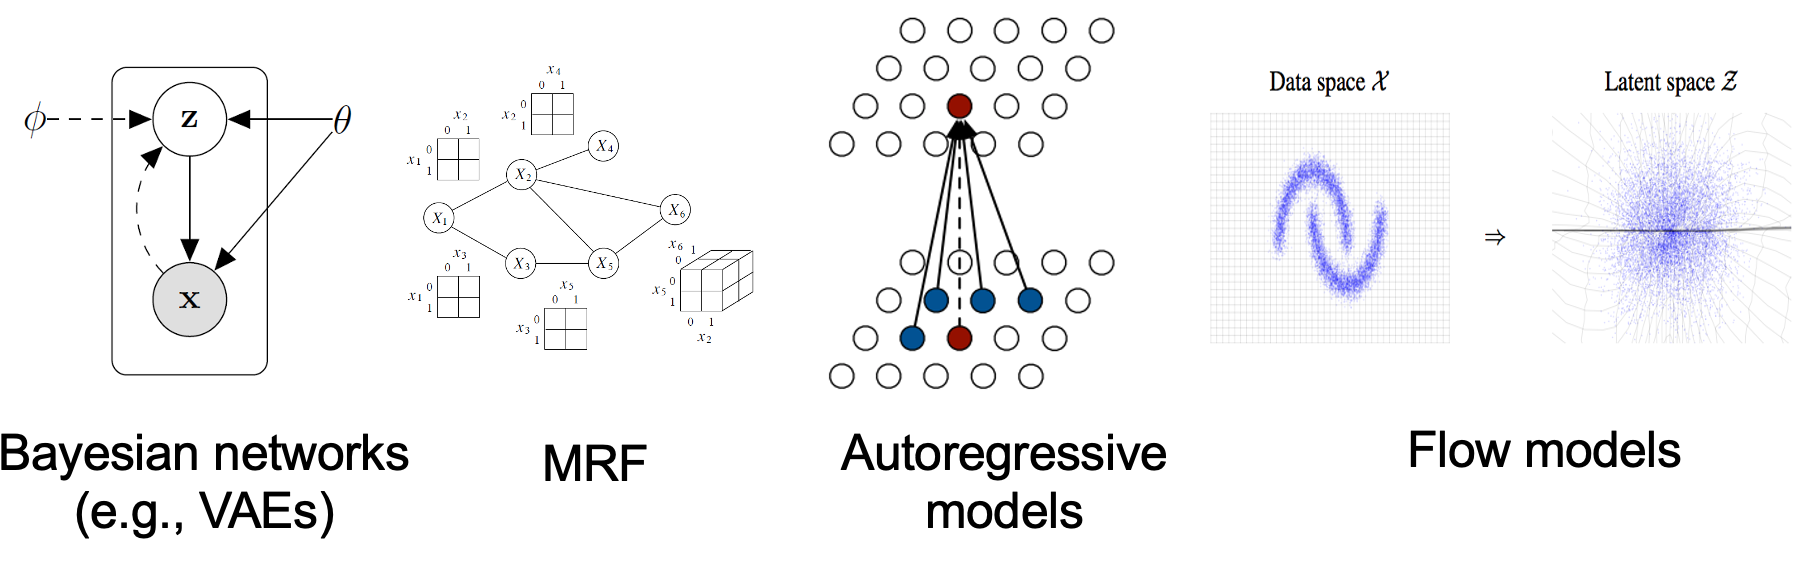 Using generative models to make probabilistic statements about